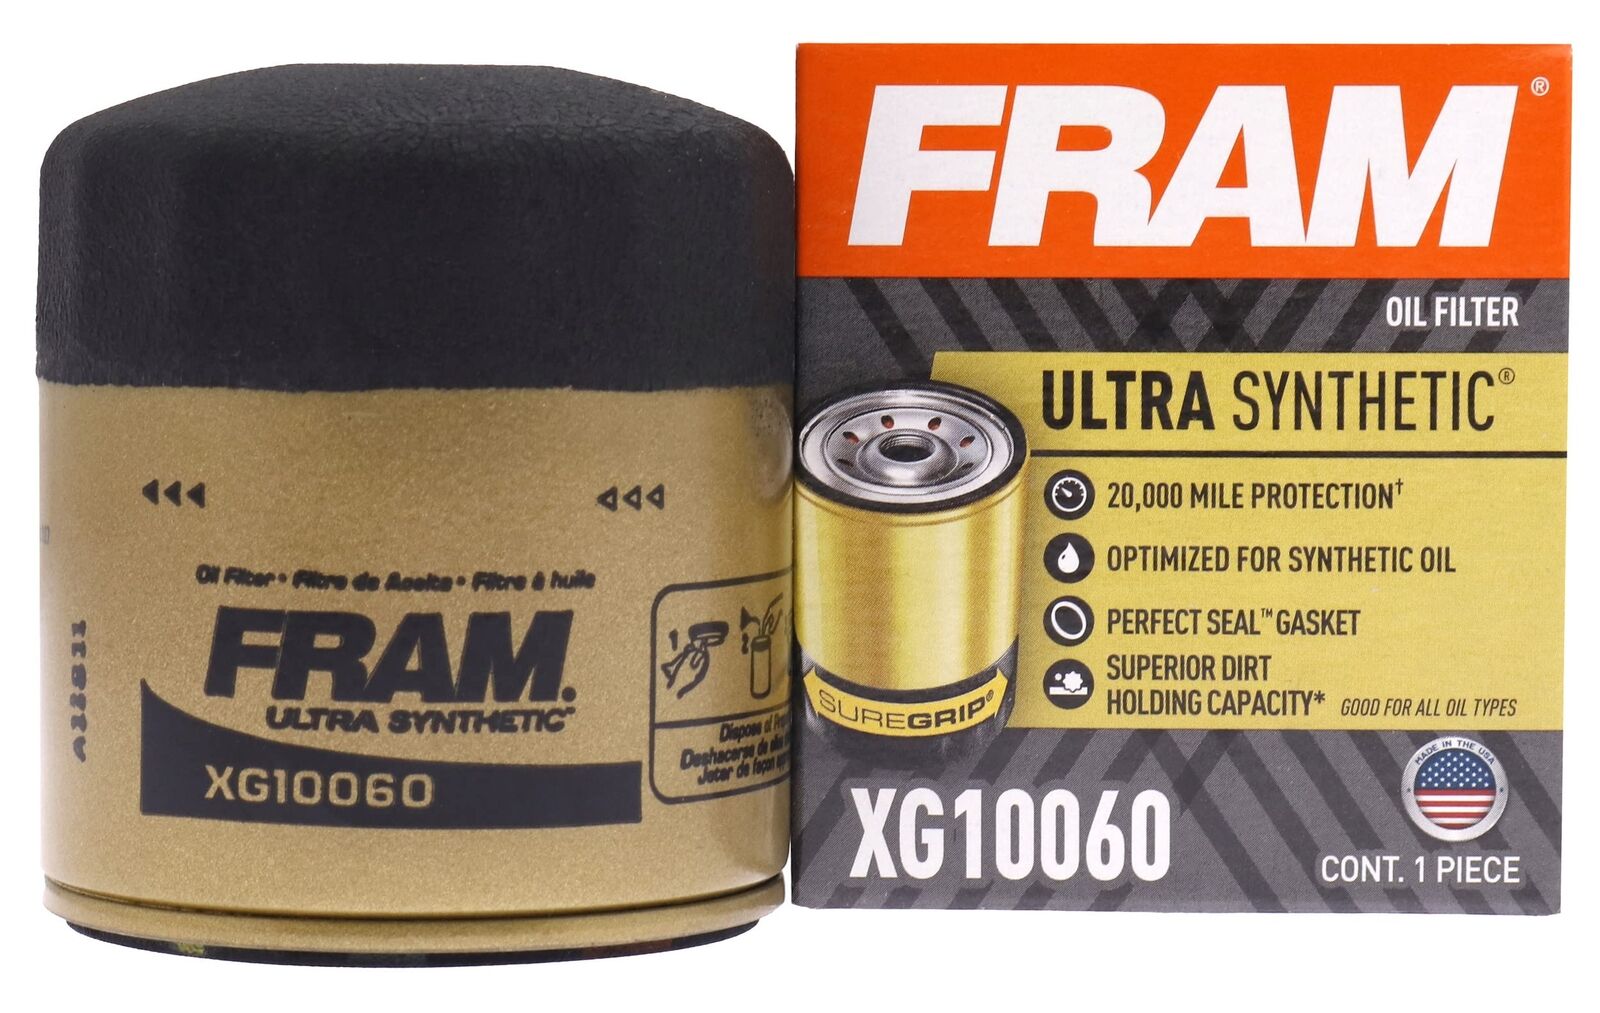 FRAM Ultra Synthetic Automotive Oil Filter, Designed for Synthetic Oil Change...